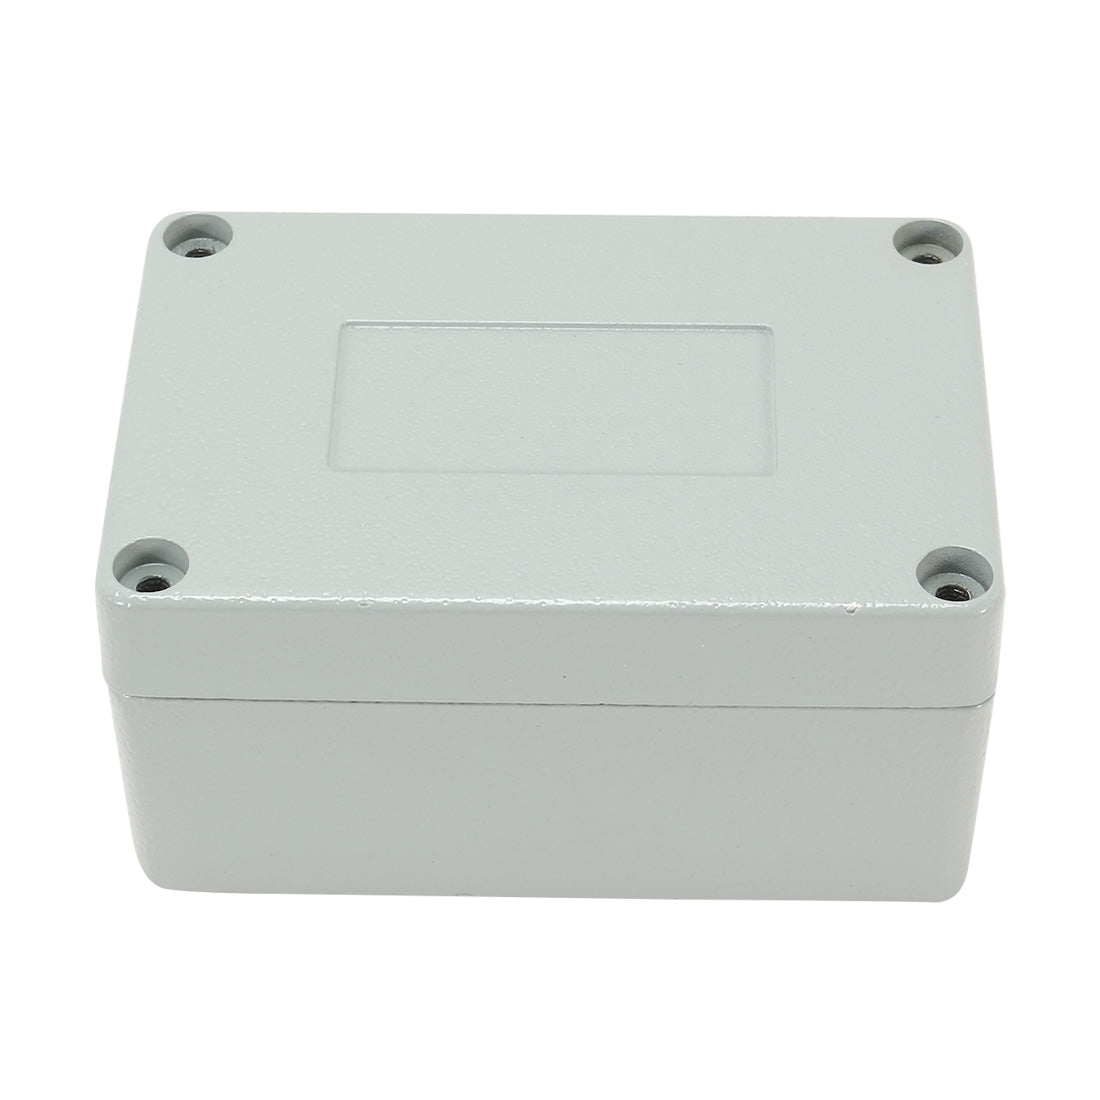 uxcell Uxcell 3.9"x2.7"x2"(100mmx68mmx50mm) Aluminum Clamshell Junction Box Universal Electric Project Enclosure